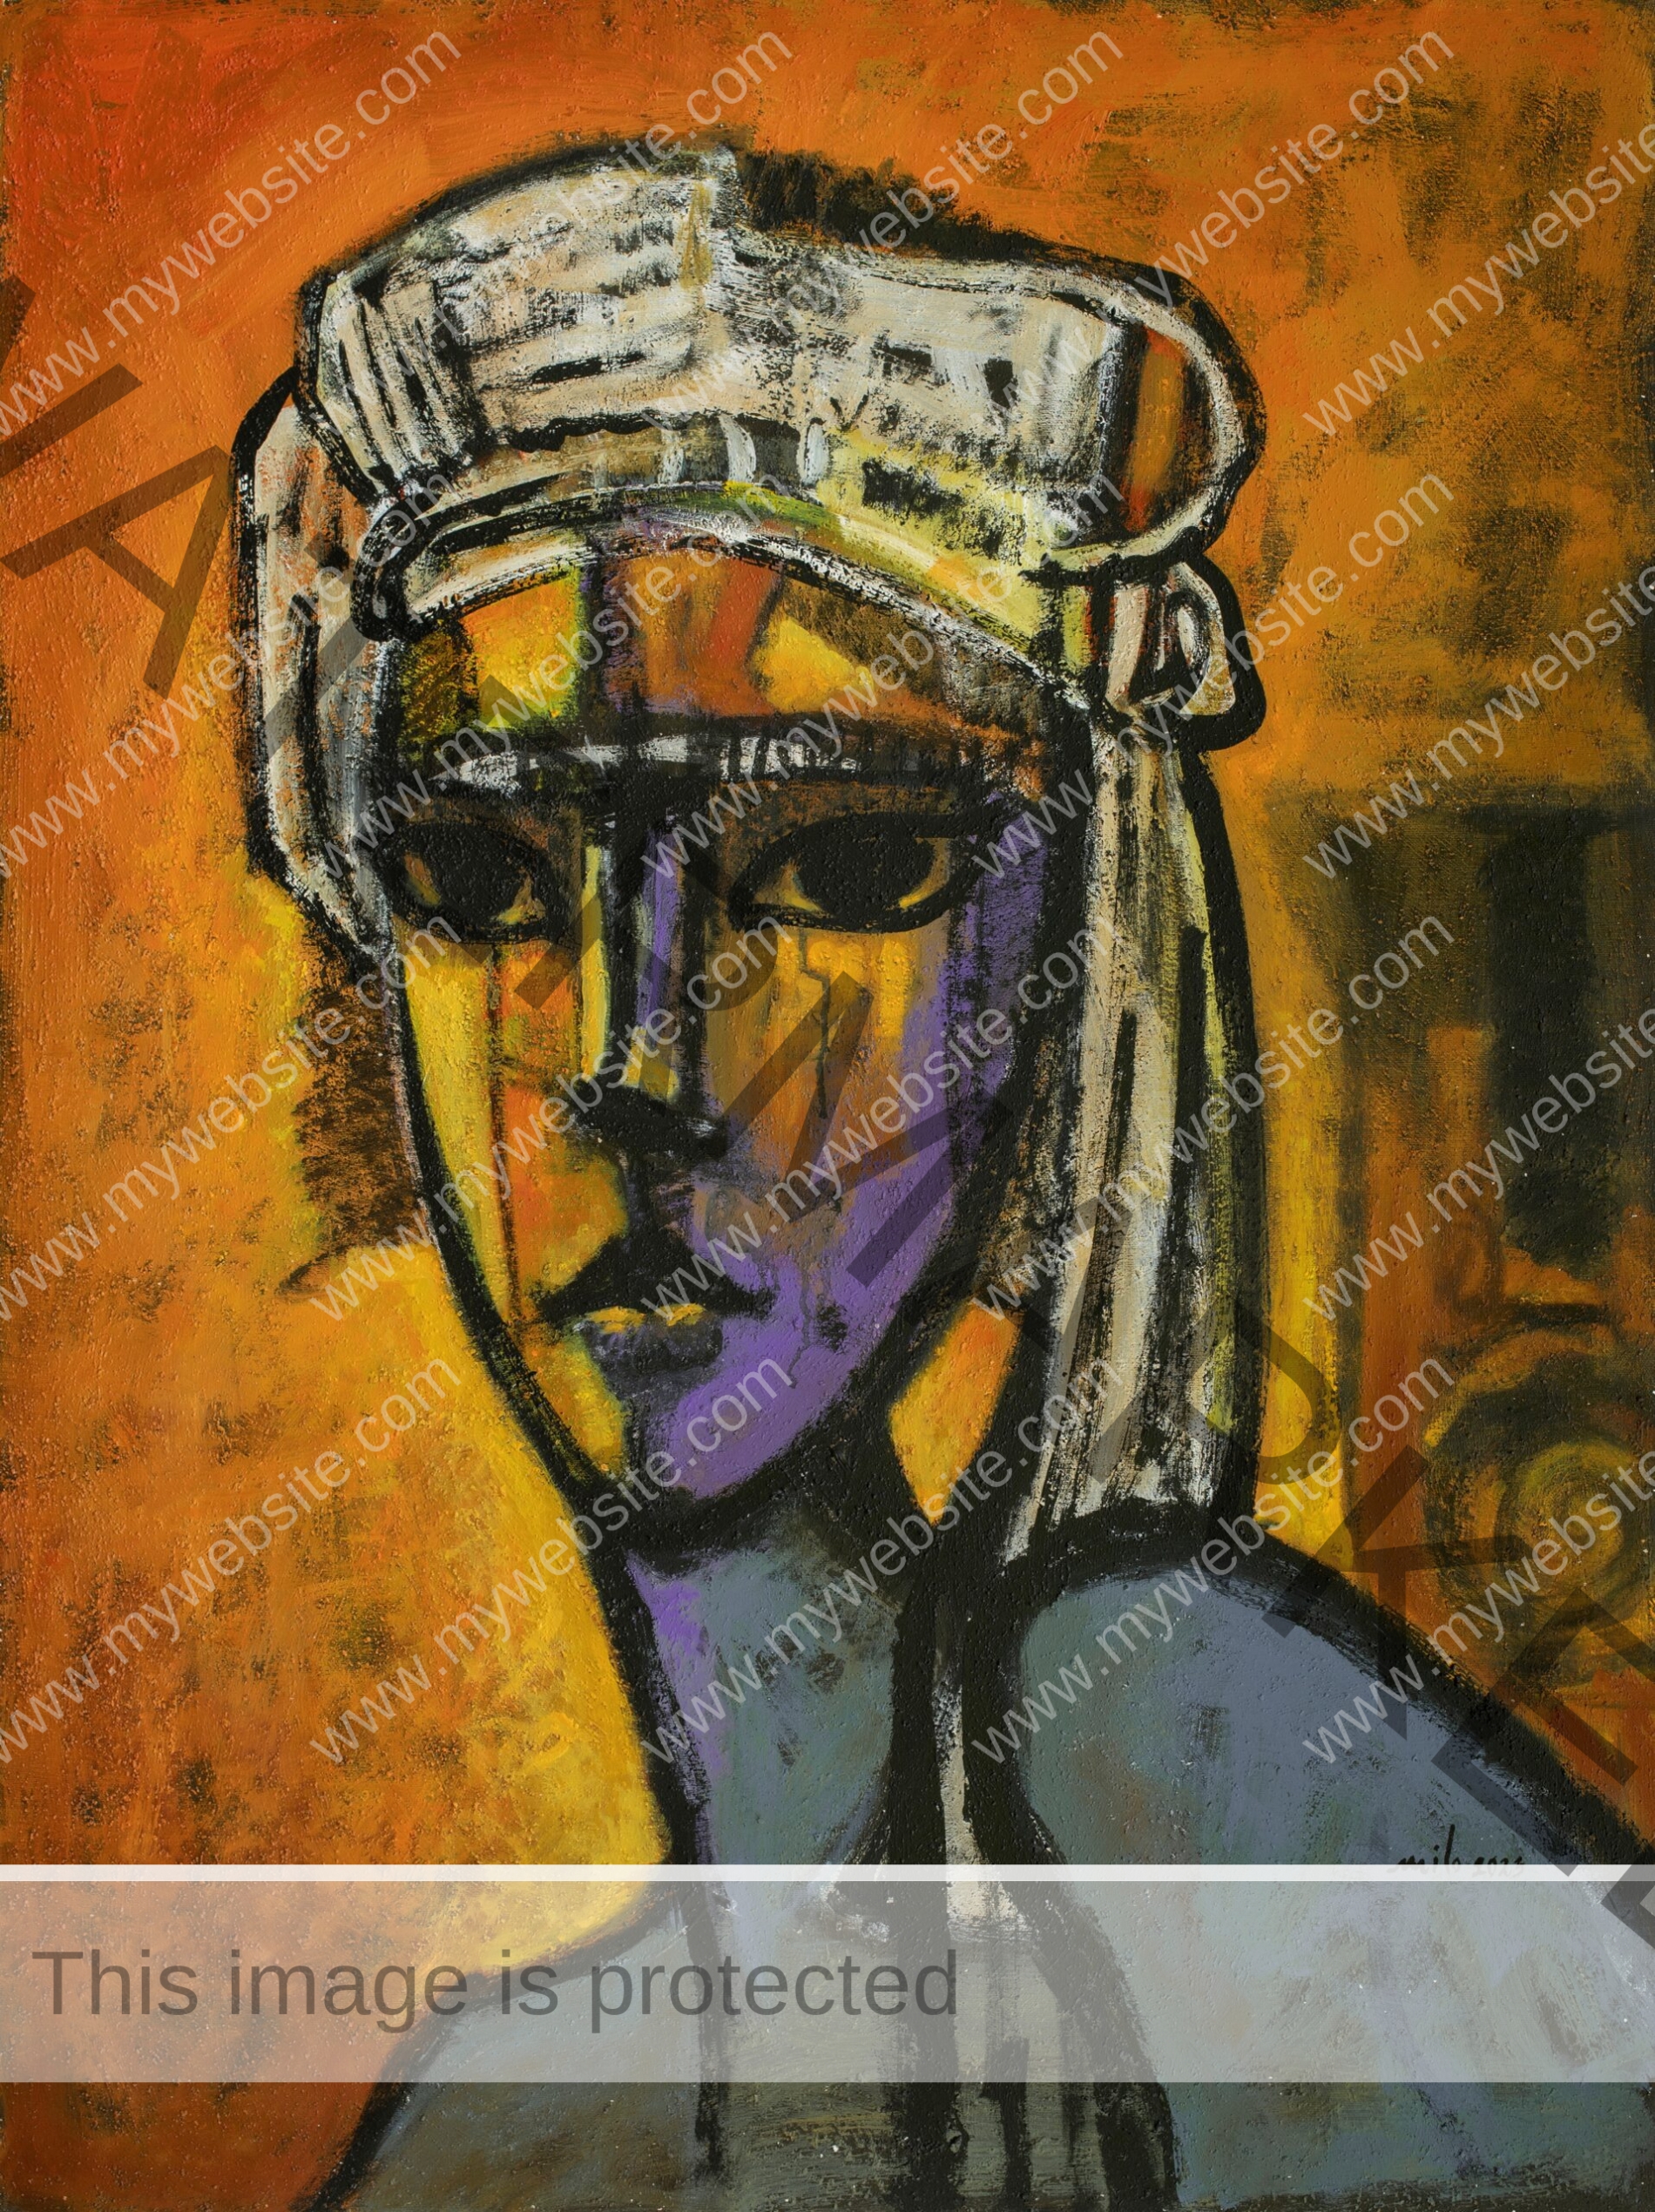 turban woman painting by Milo Gonzalez, featuring a close-up of. a woman who is wearing a turban. Her face is painted with stripes of purple and orange and the background is bright orange. It has an expressionist feel.